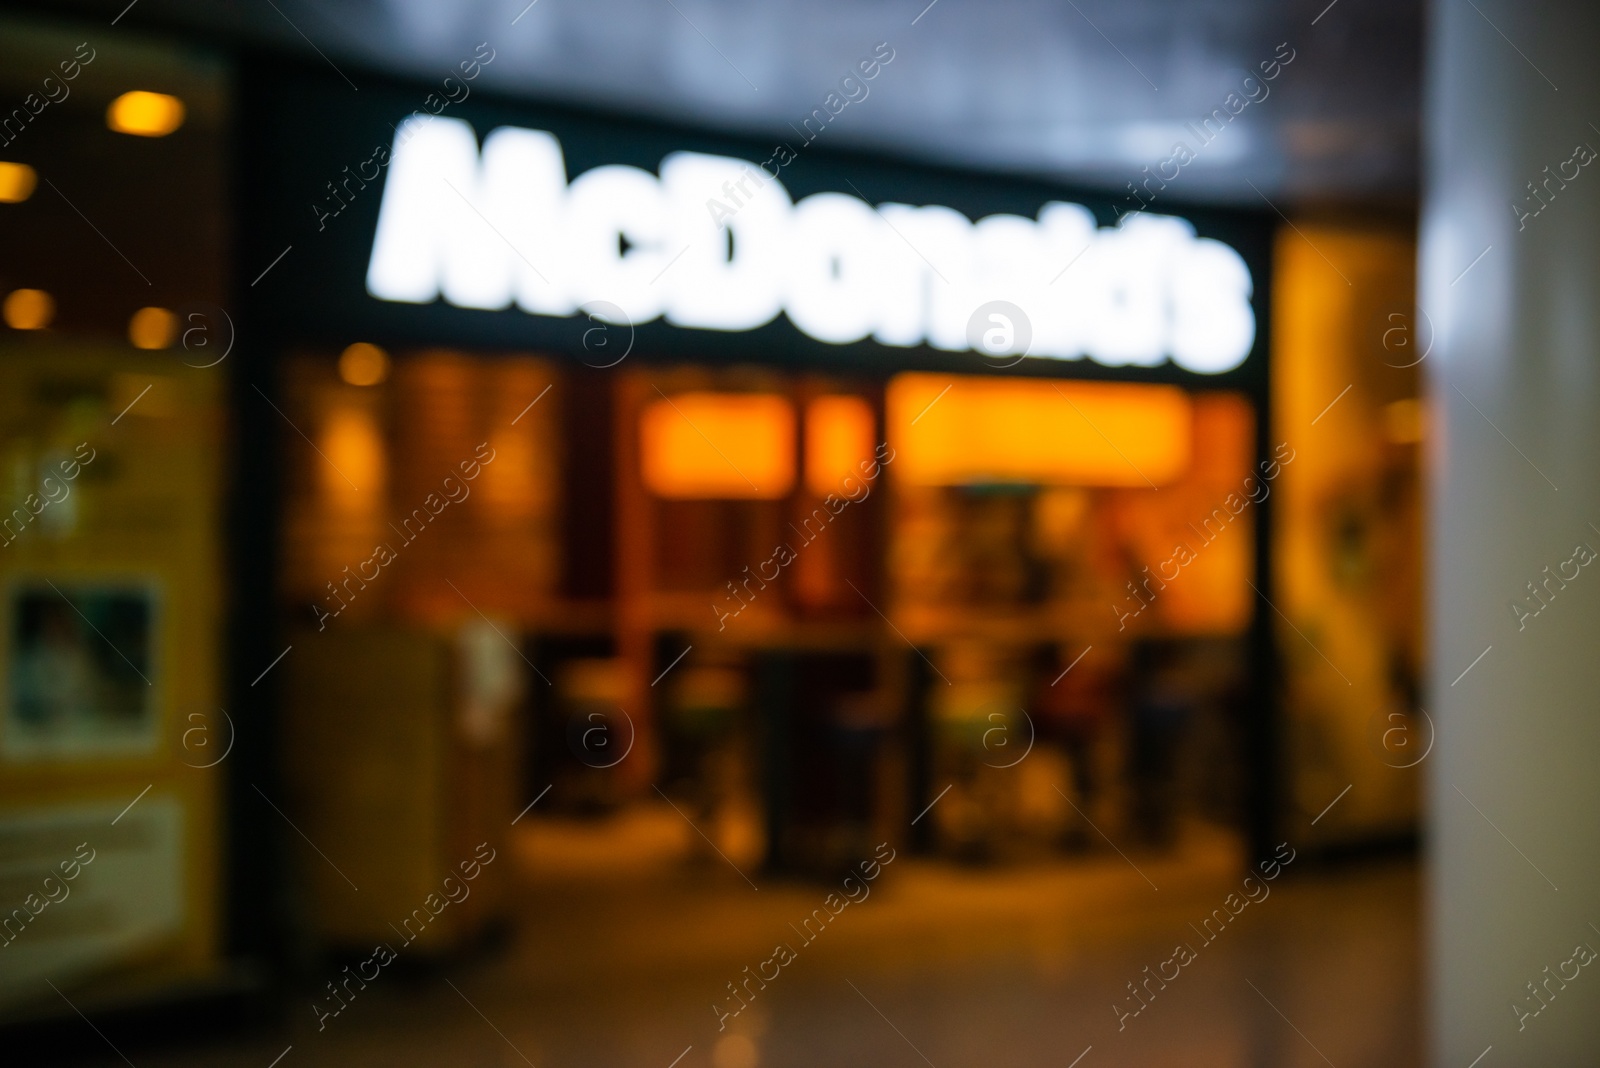 Photo of WARSAW, POLAND - AUGUST 05, 2022: Blurred view of McDonald's Restaurant entrance indoors